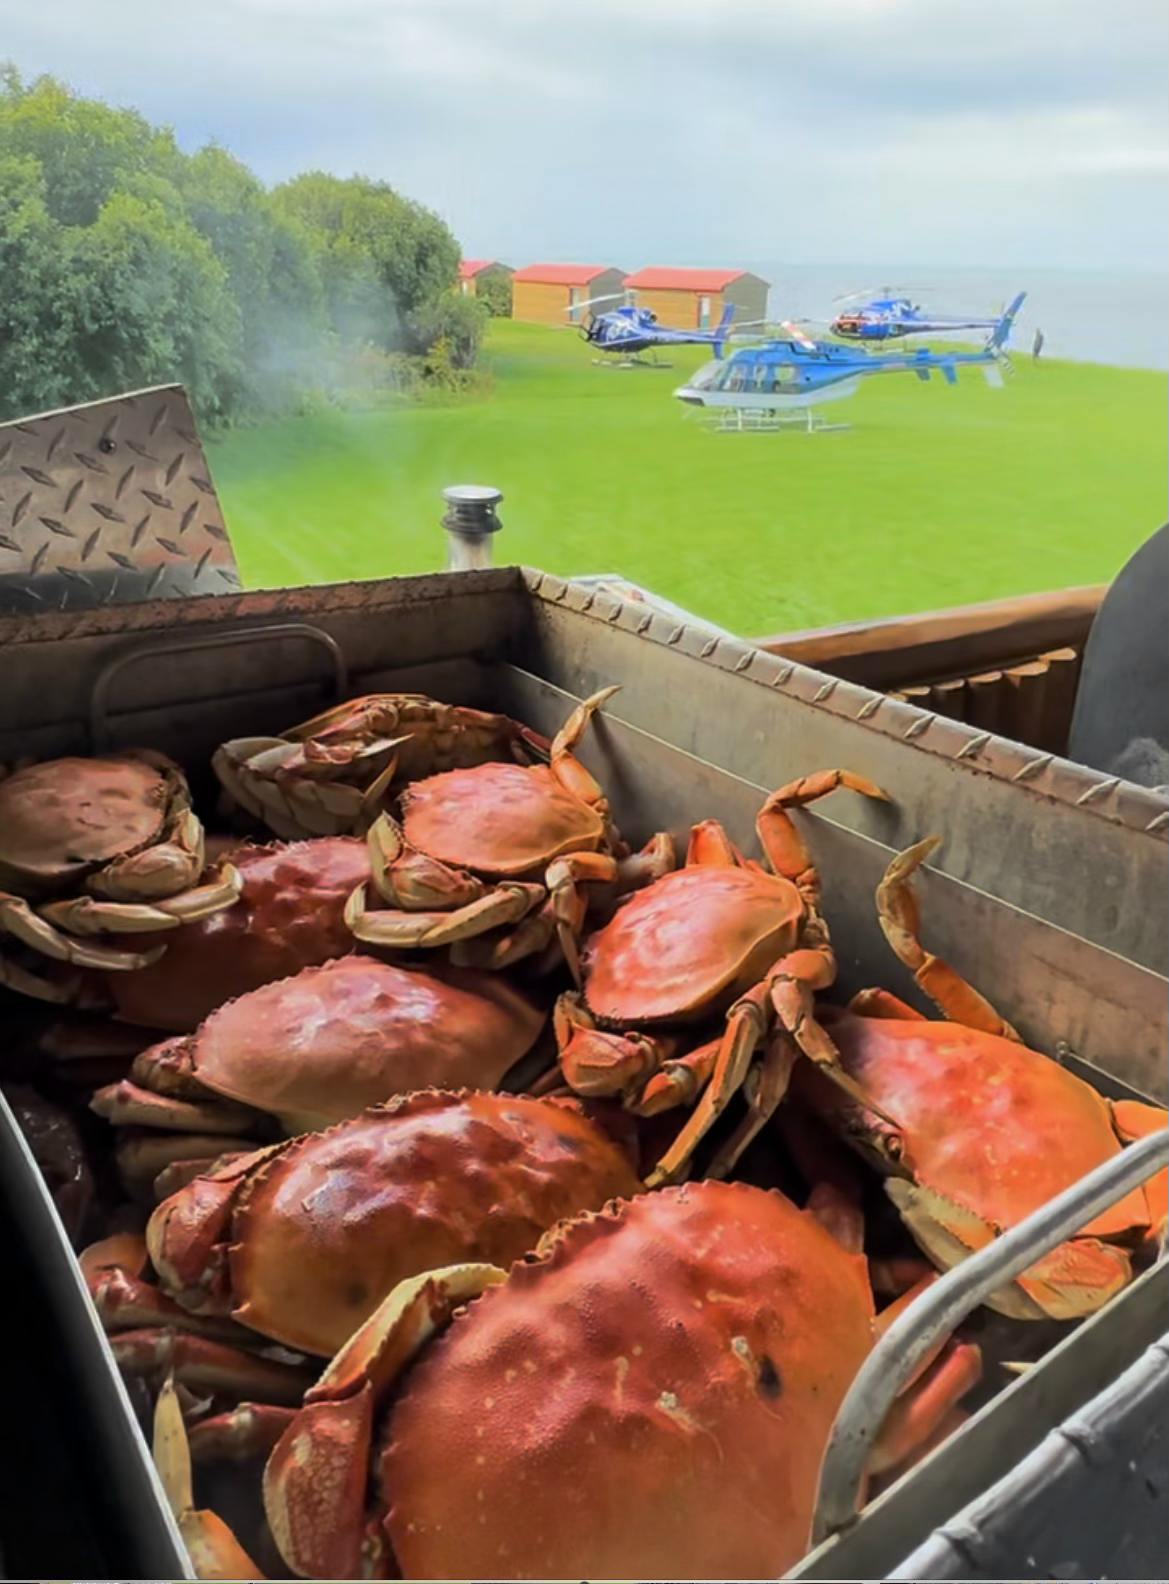 Dungeness crabs for lunch